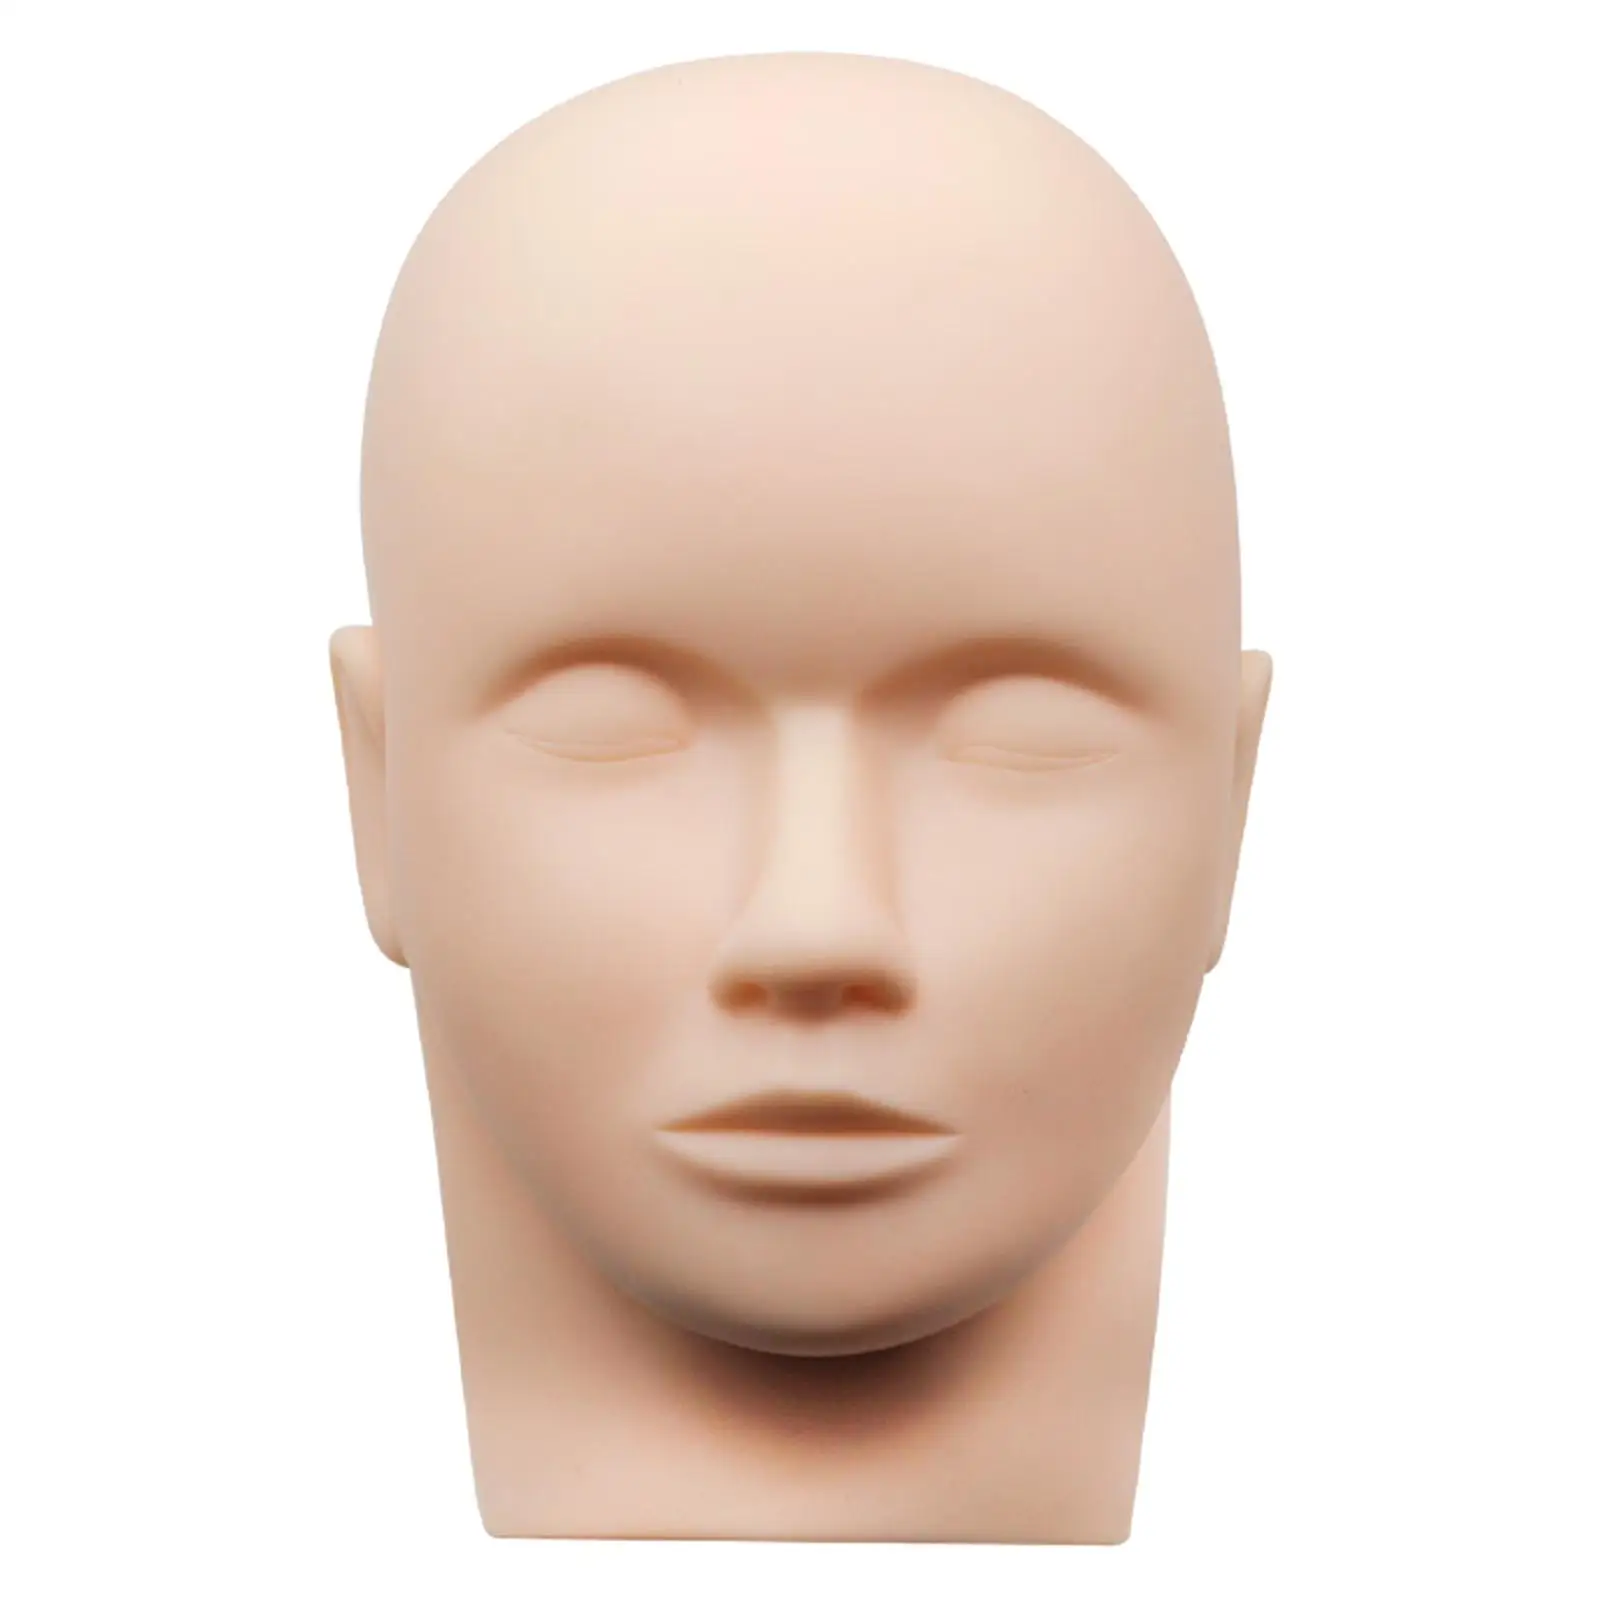 False Eyelash Silicone Head Mold Soft Touch Training Mannequin Head Practice Head Mannequin Make up Training Practice